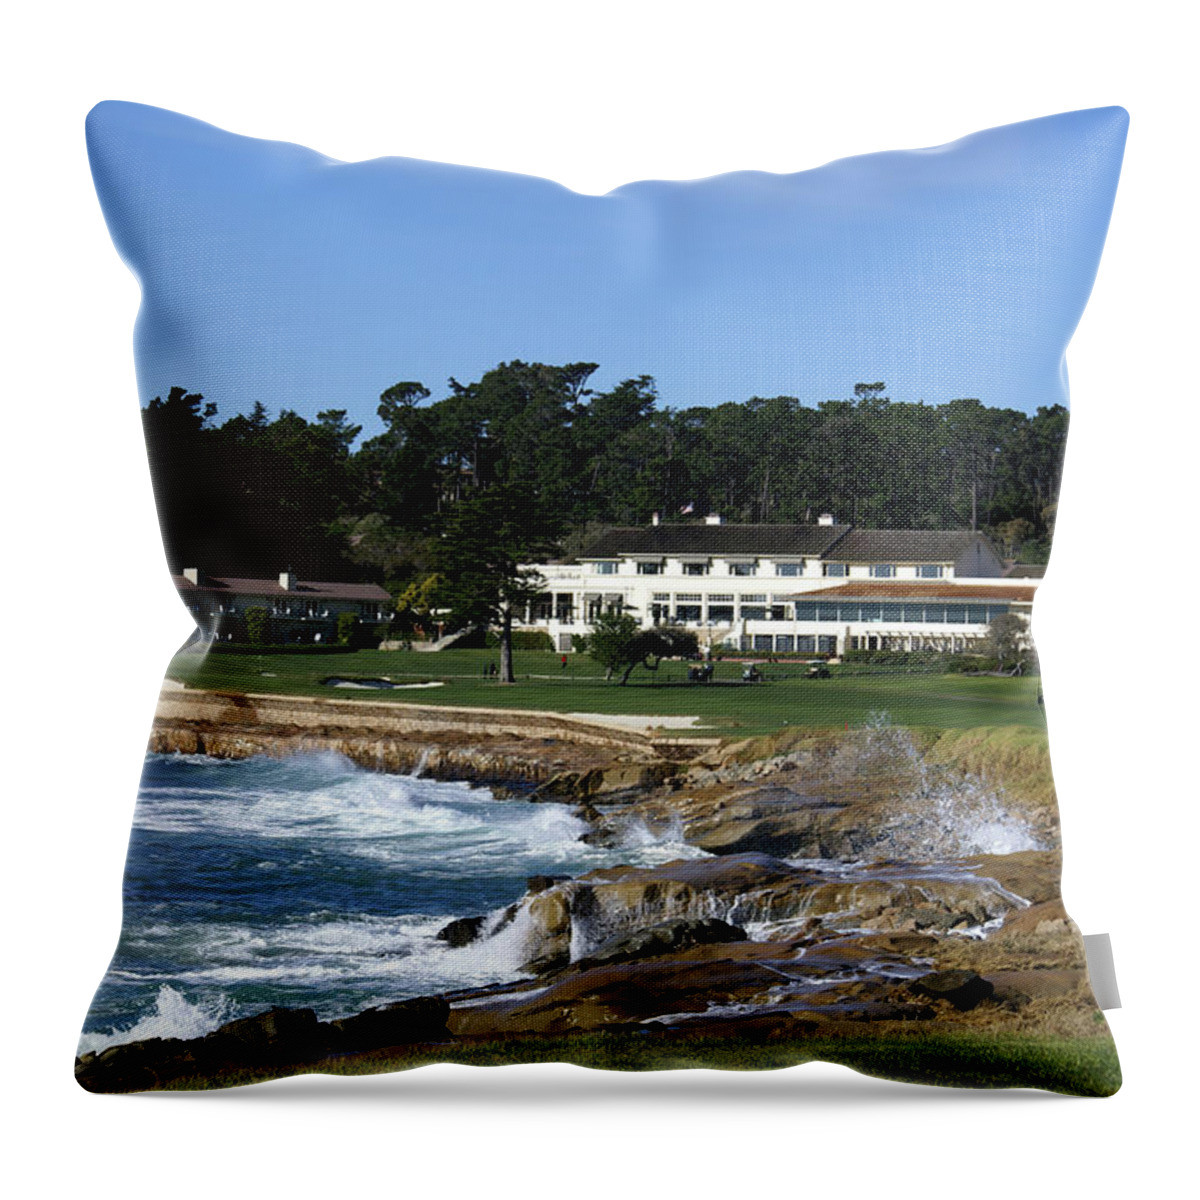 The 18th At Pebble Throw Pillow featuring the photograph The 18th At Pebble Beach by Barbara Snyder